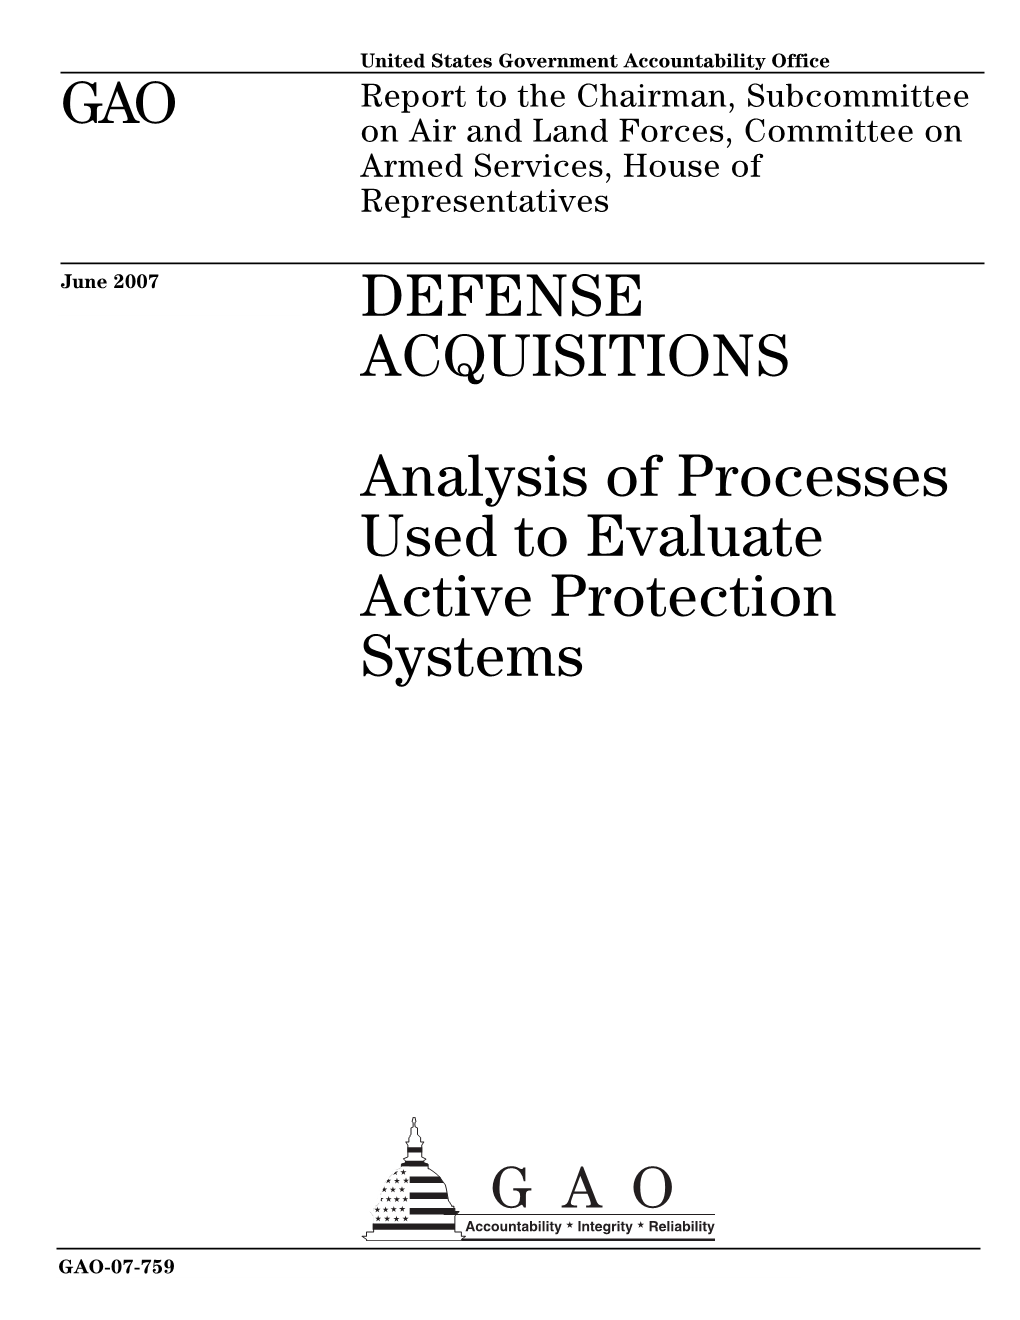 GAO-07-759 Defense Acquisitions